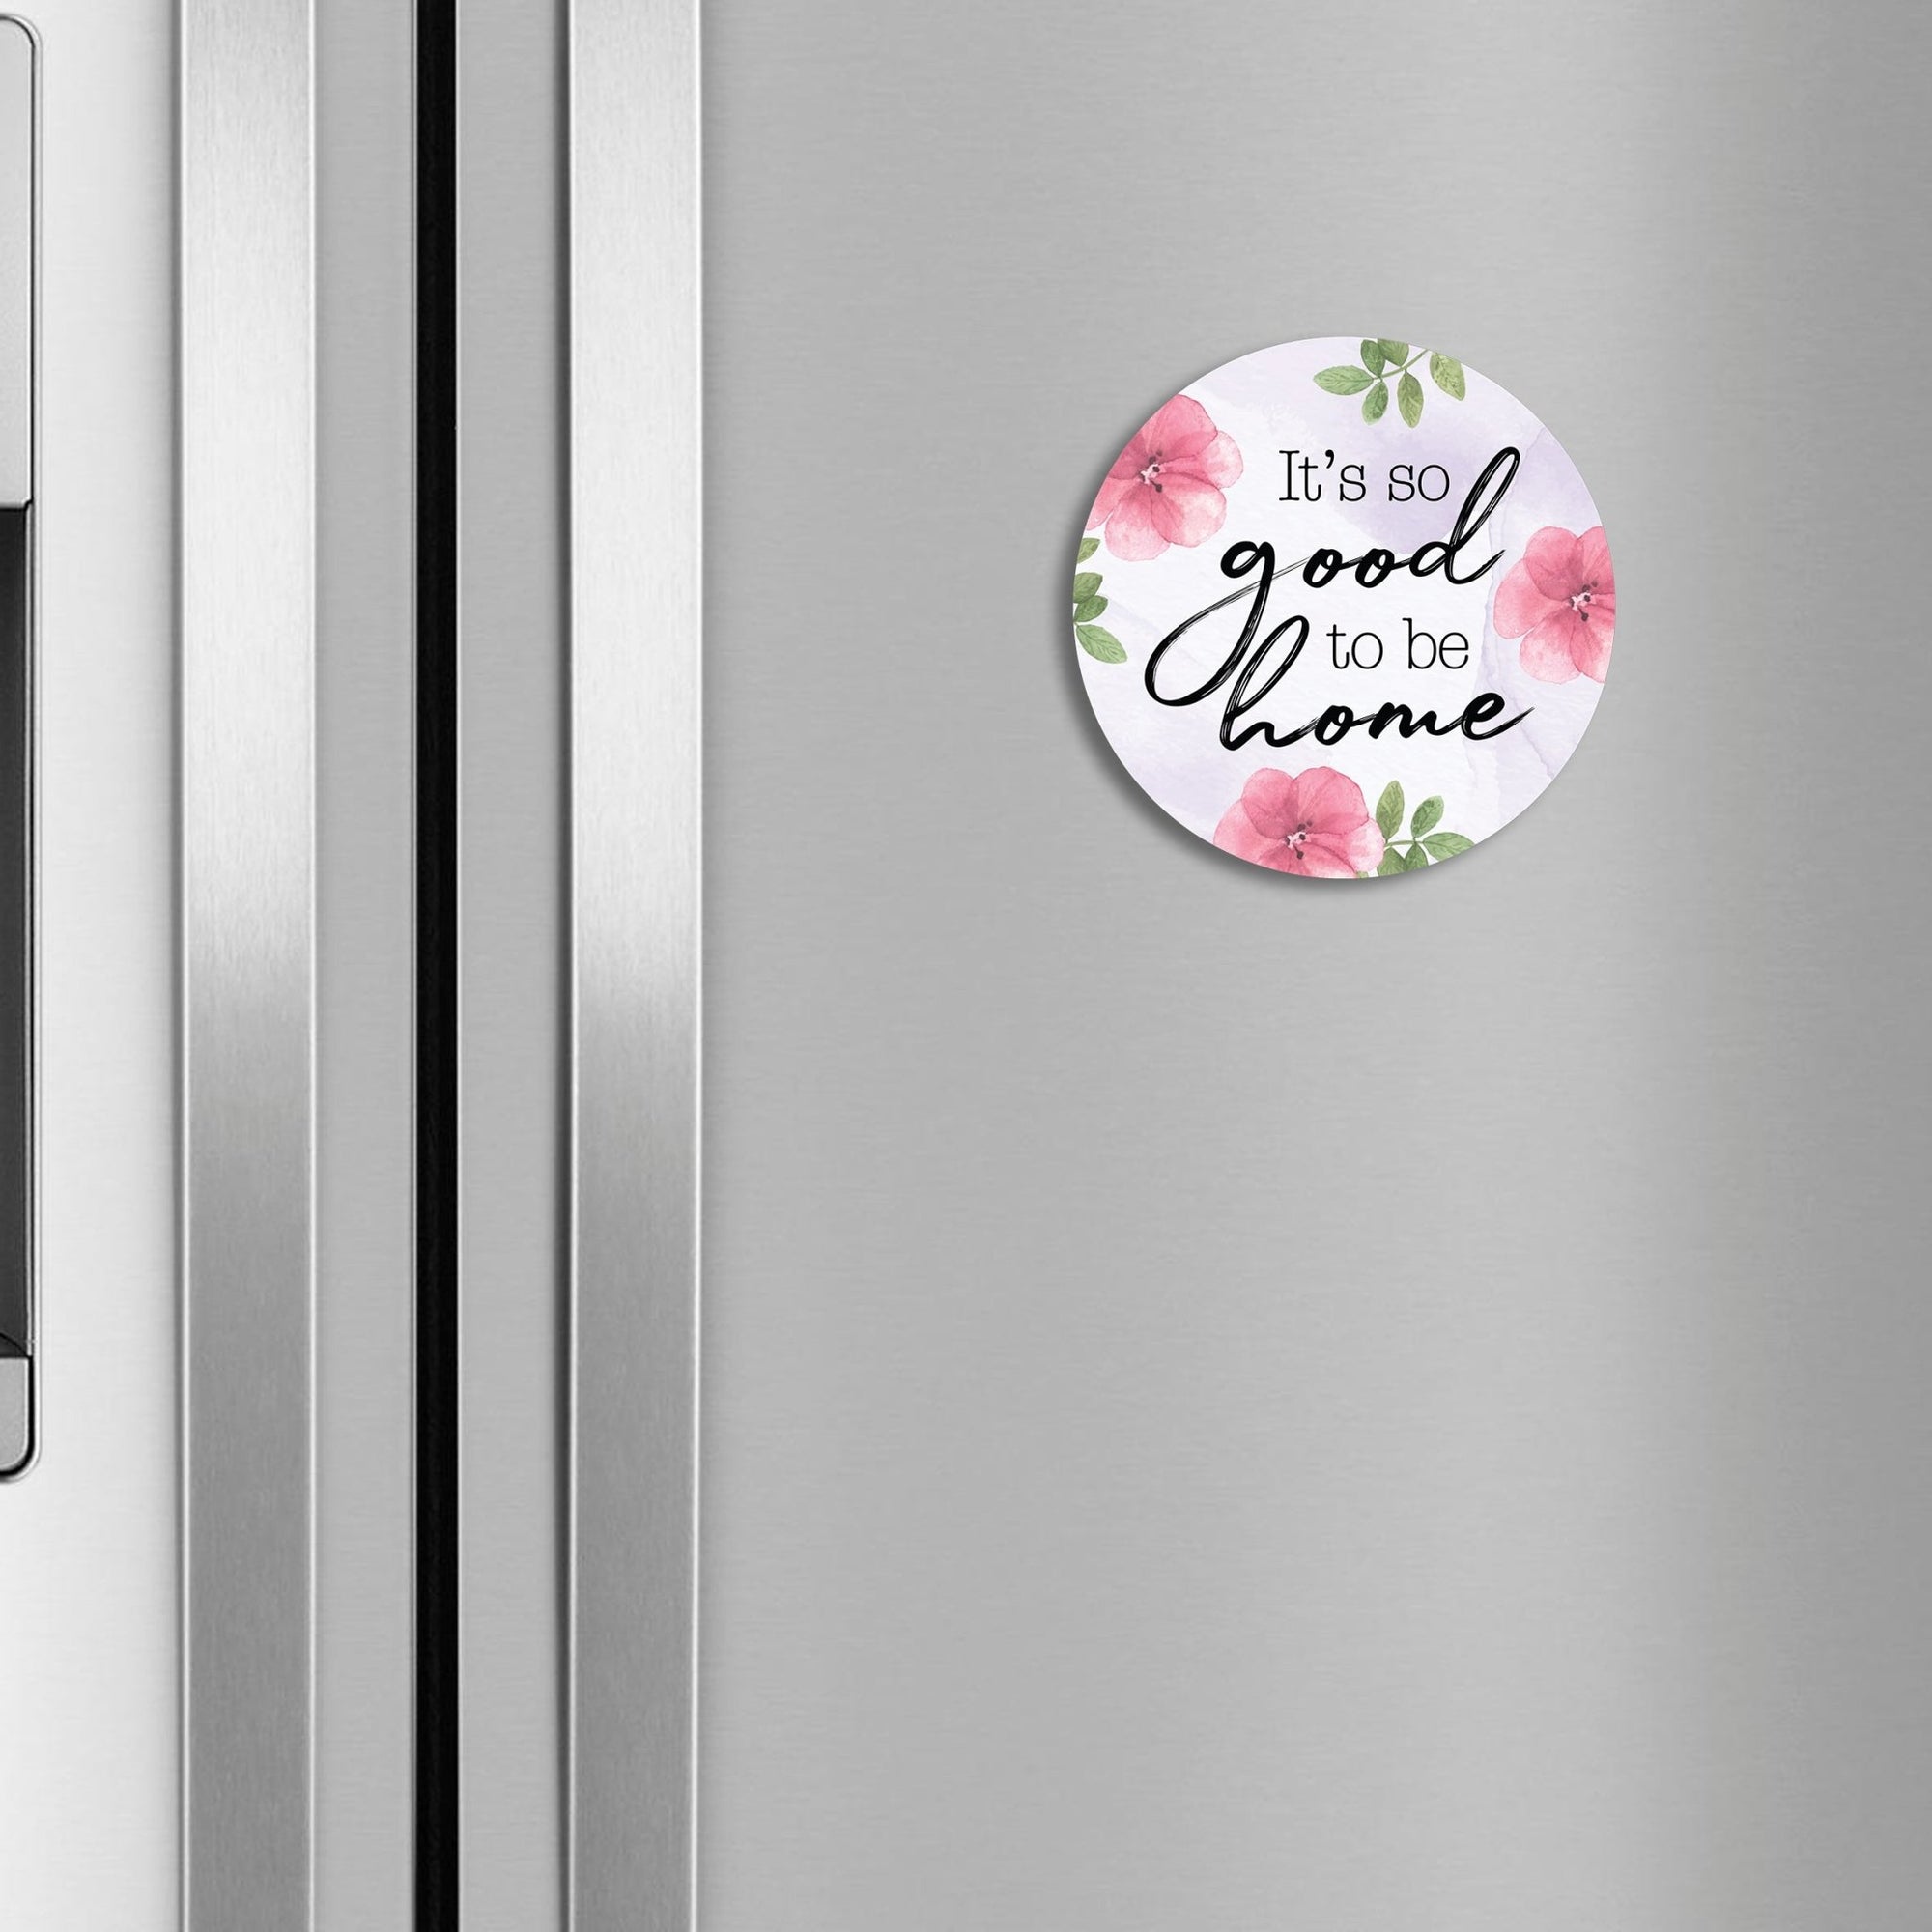 Family & Home Refrigerator Magnet Perfect Gift Idea For Home Décor - It's So Good